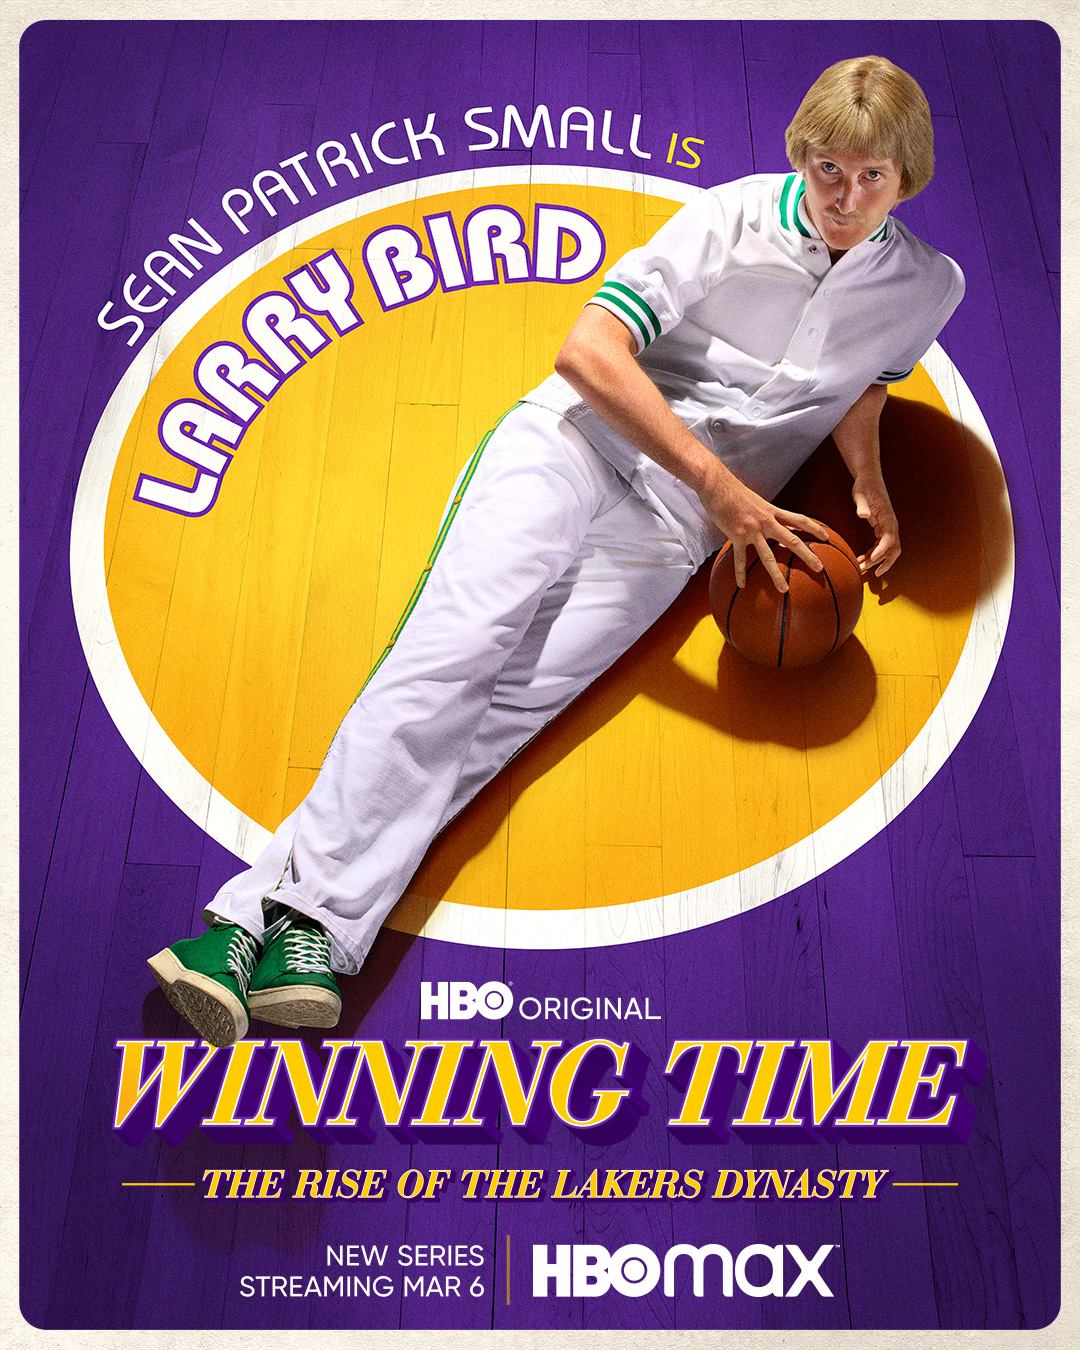 Winning Time Posters Set Premiere Date for HBOs Lakers Series